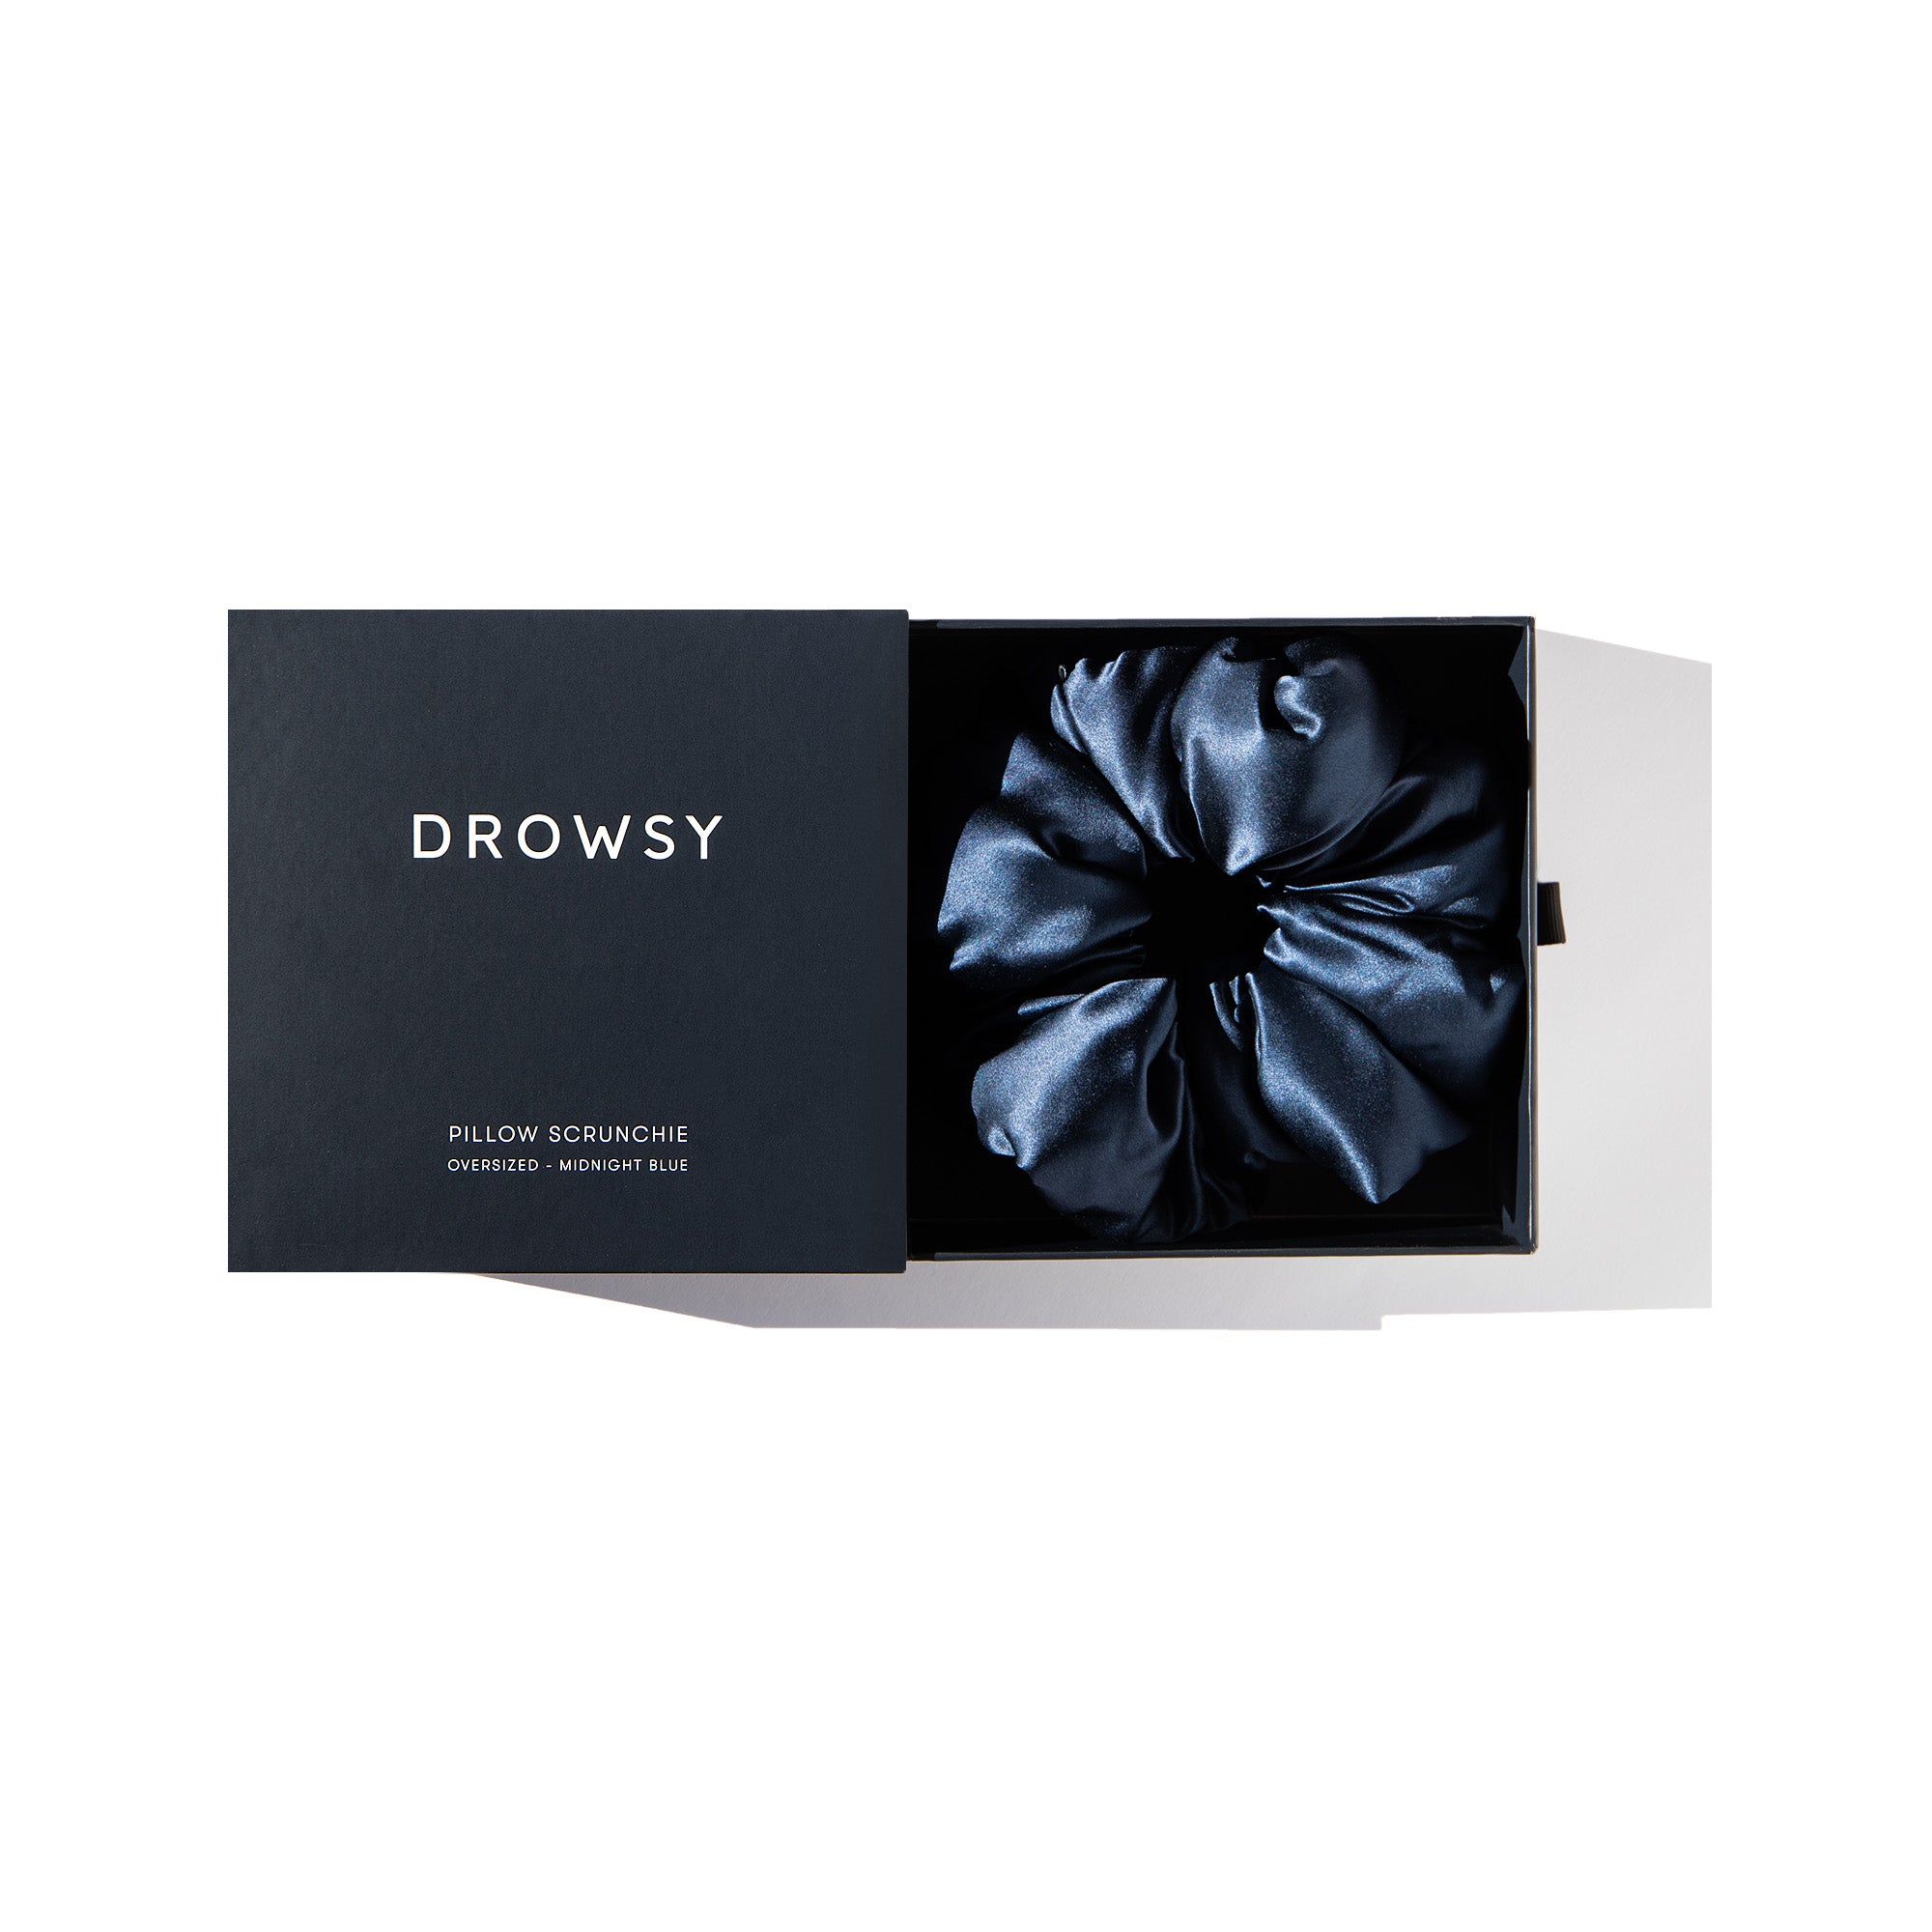 Drowsy Midnight Blue Pillow Scrunchie in its box on a white background